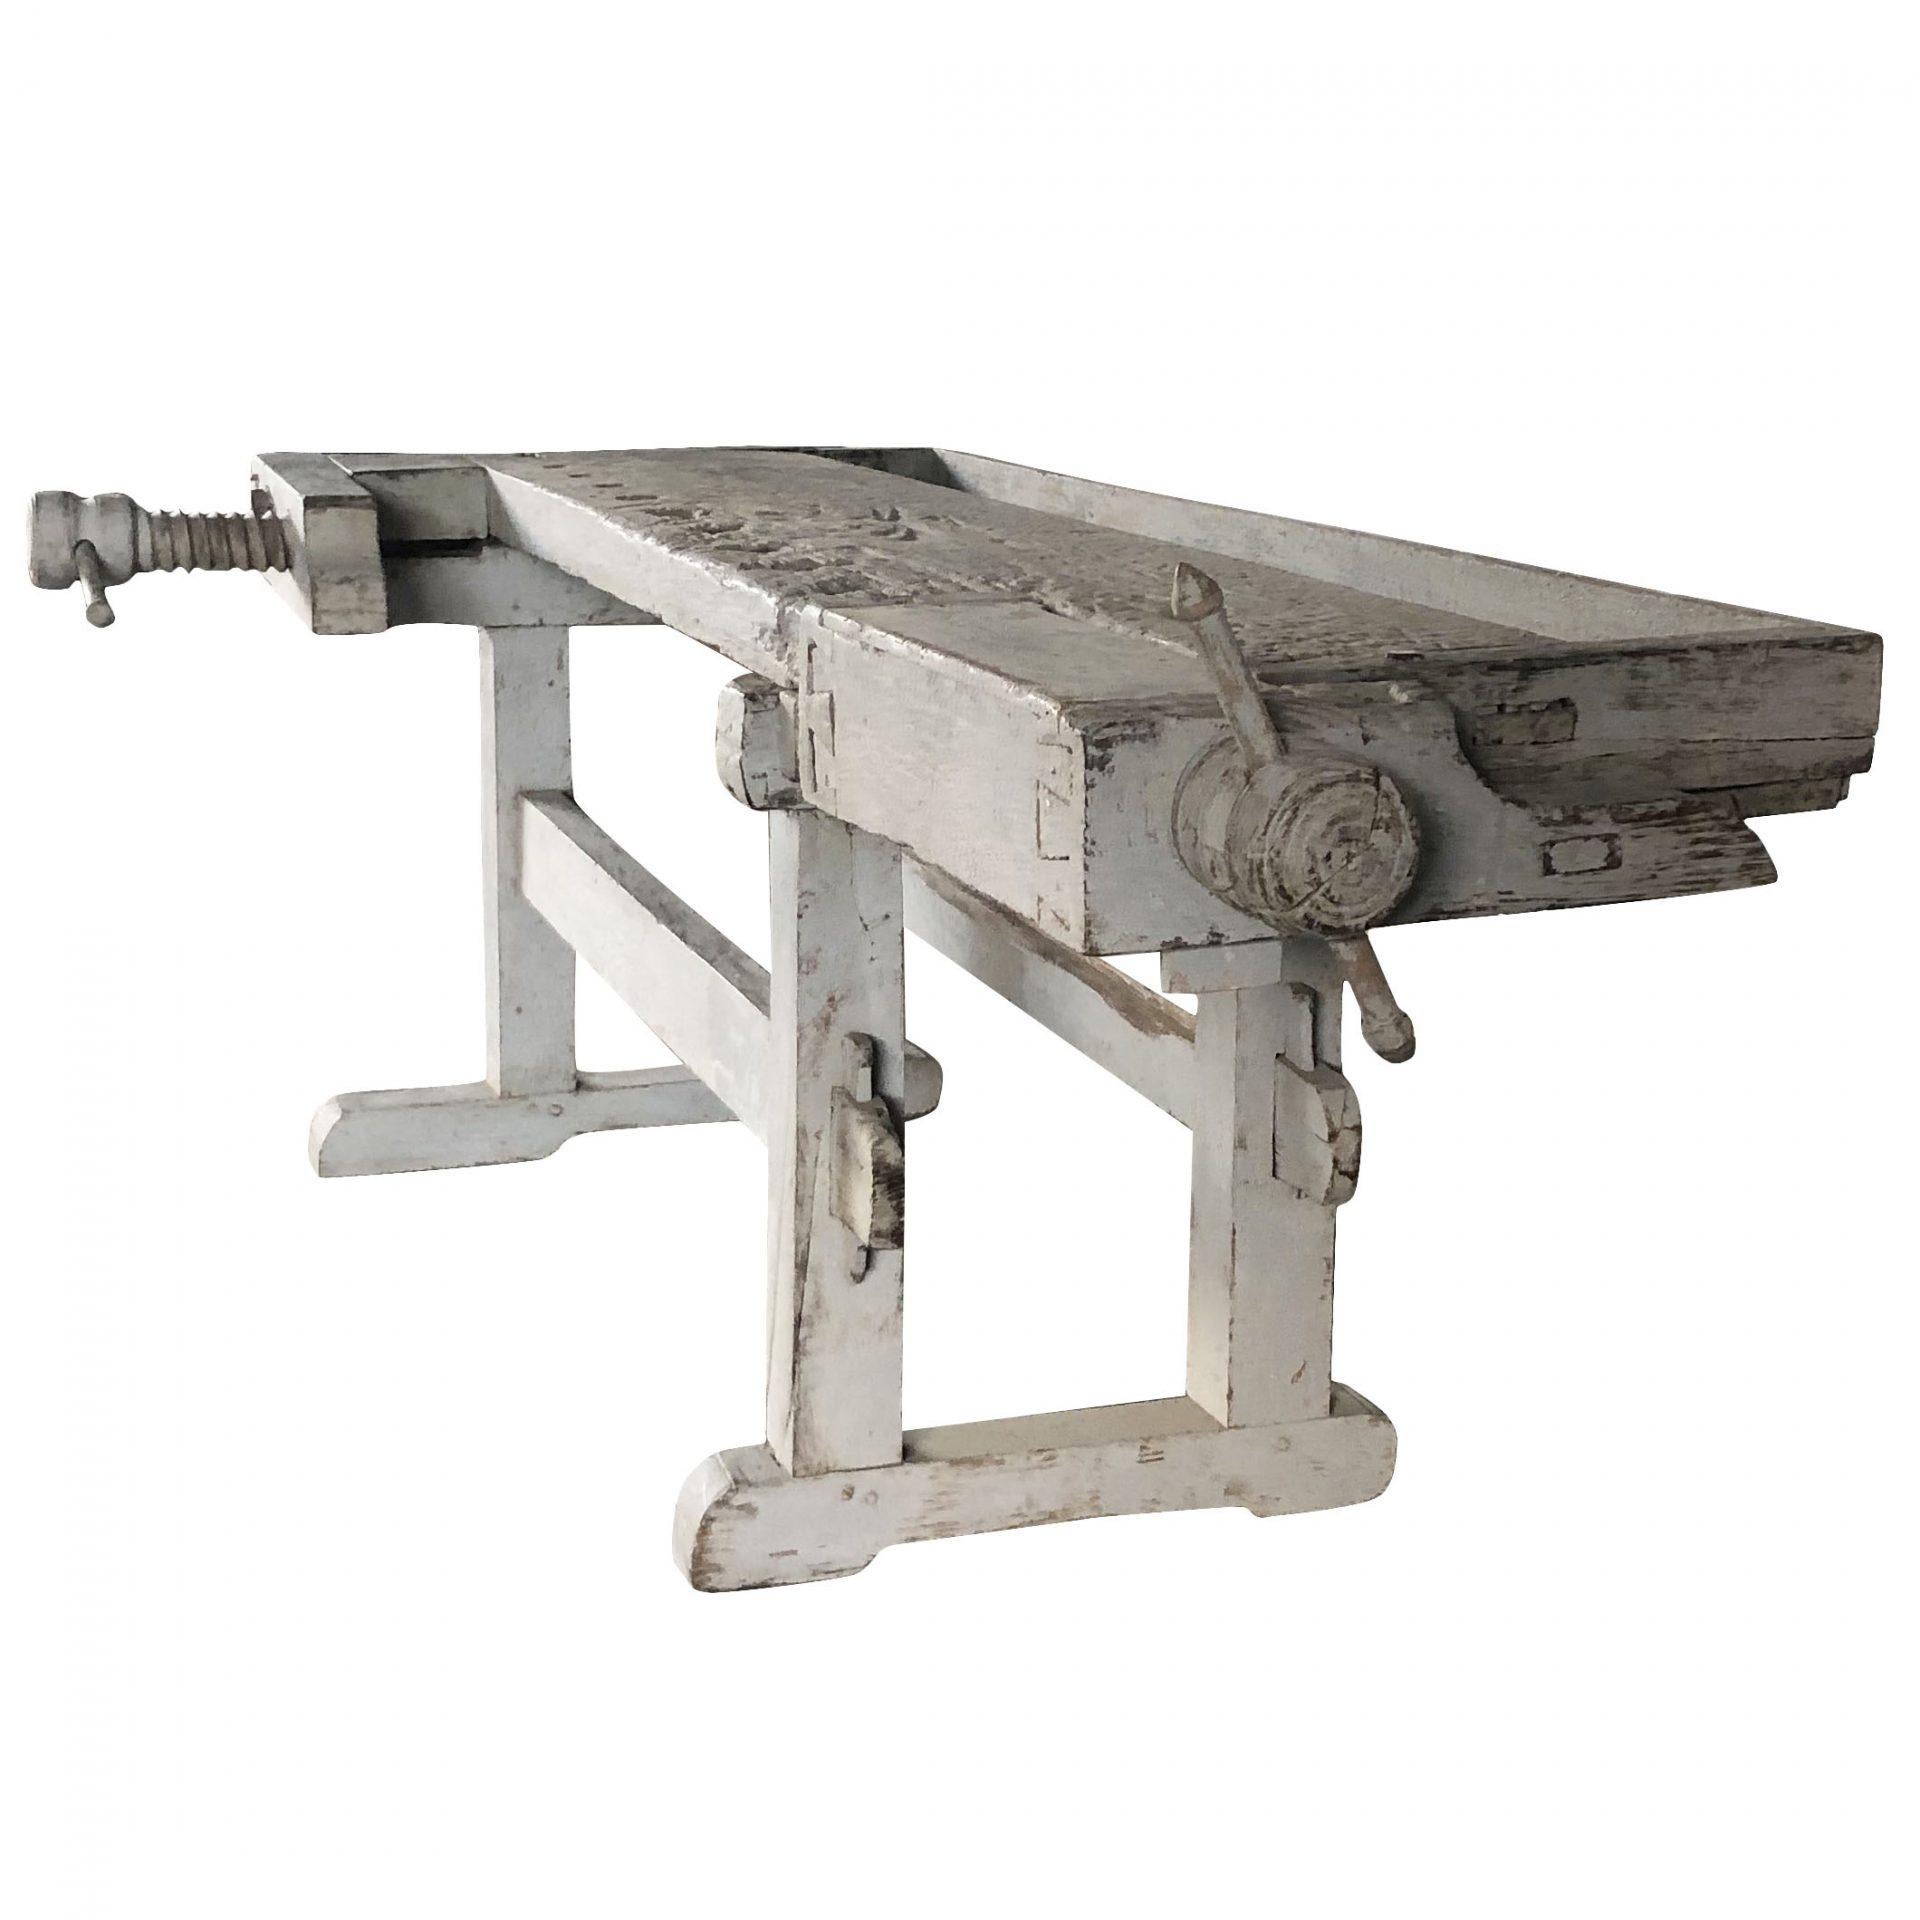 A 19th Century, antique Swedish Gustavian working bench made of hand crafted painted Pinewood in a pale grey finish, in good condition. The detailed Scandinavian carpenter bench is composed with its original wooden screw, standing on four wooden